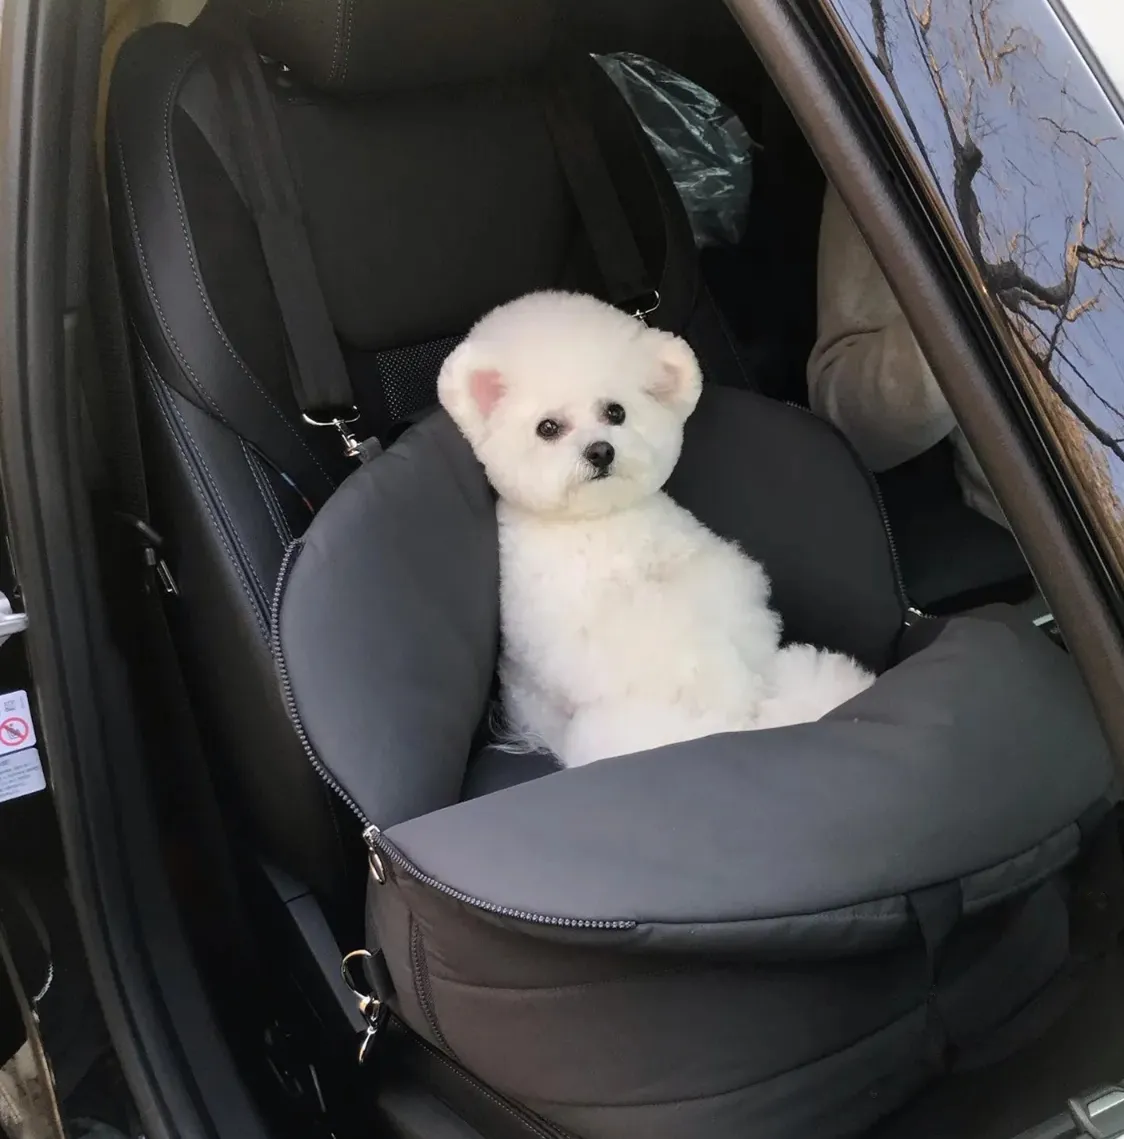 Dog Car Seat Pet Carrier Booster Seat Pet Carry Bag for Dogs Crease Resist, Open Zipper Pet House Outdoor Travel Bag Tote Bag